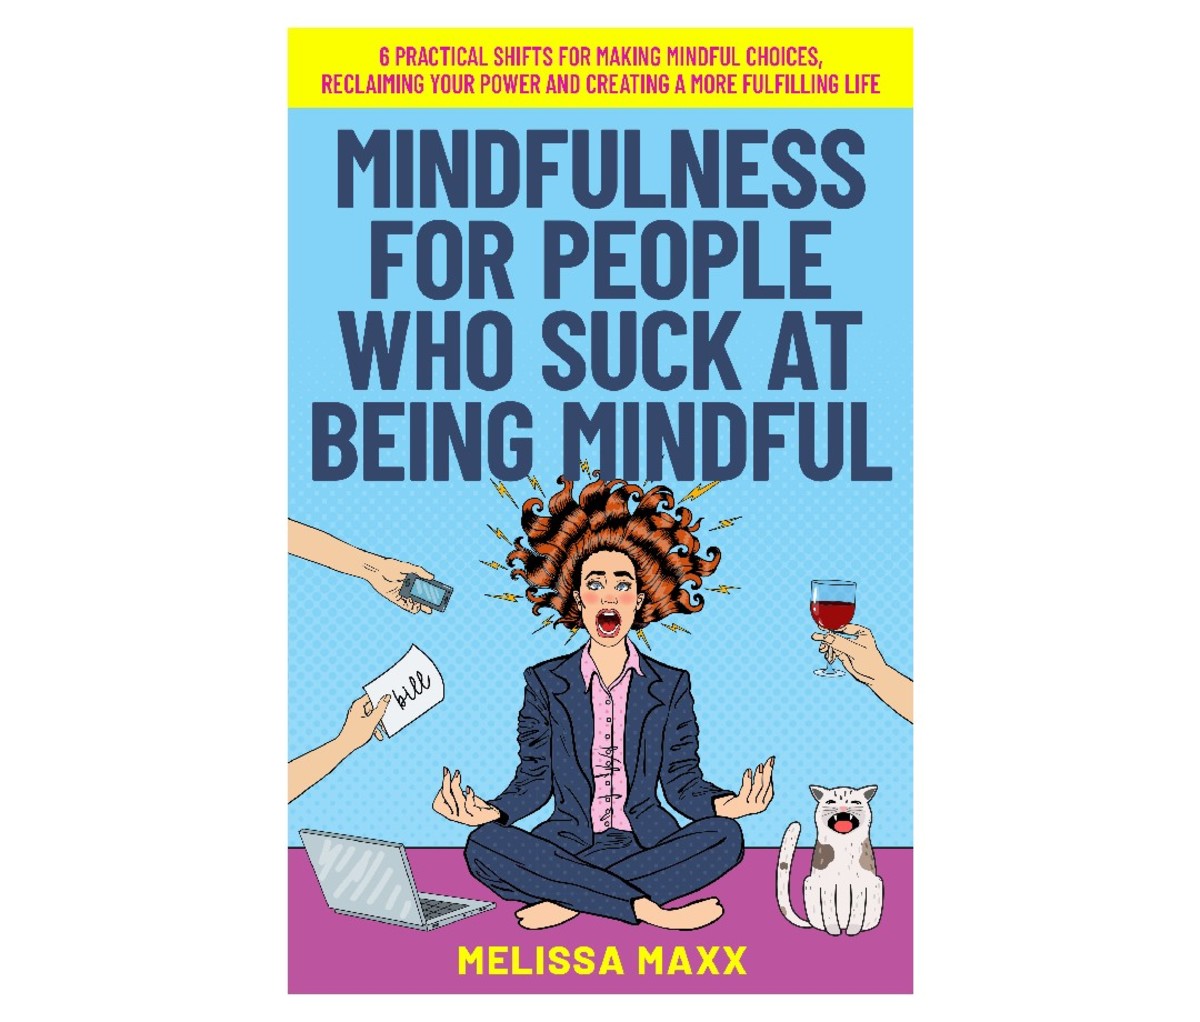 Mindfulness For People Who Shit About Being Mindful: 6 Practical Changes to Make Mindful Choices, Regain Your Strength, and Create a Fuller Life by Melissa Maxx